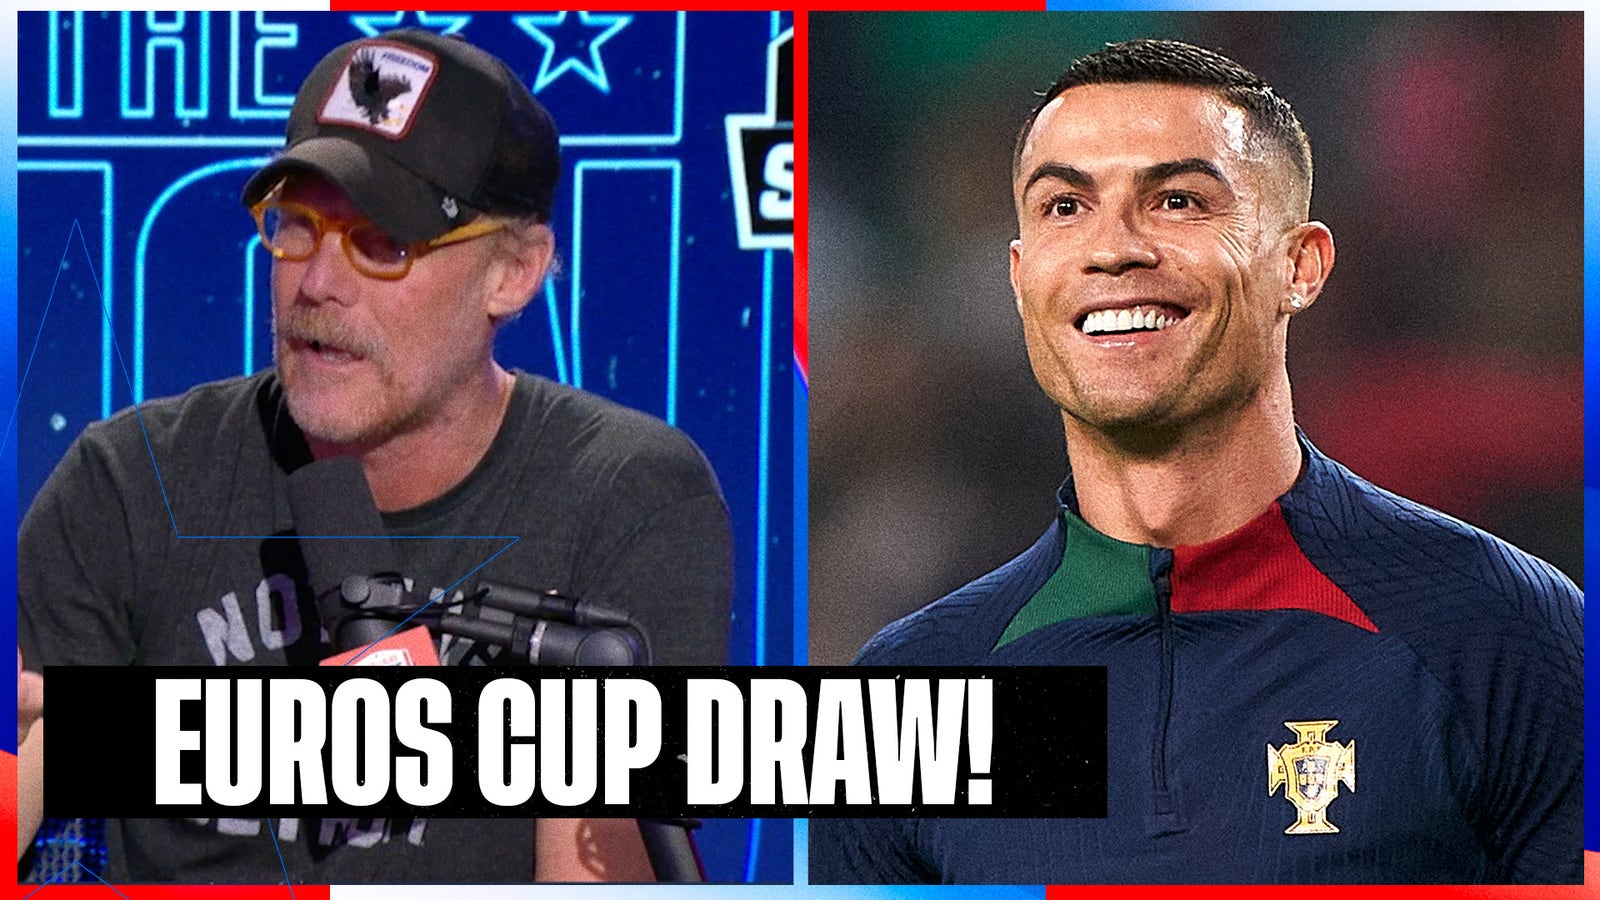 Reaction to the UEFA Euro Cup Draw and what is the group of death? | SOTU